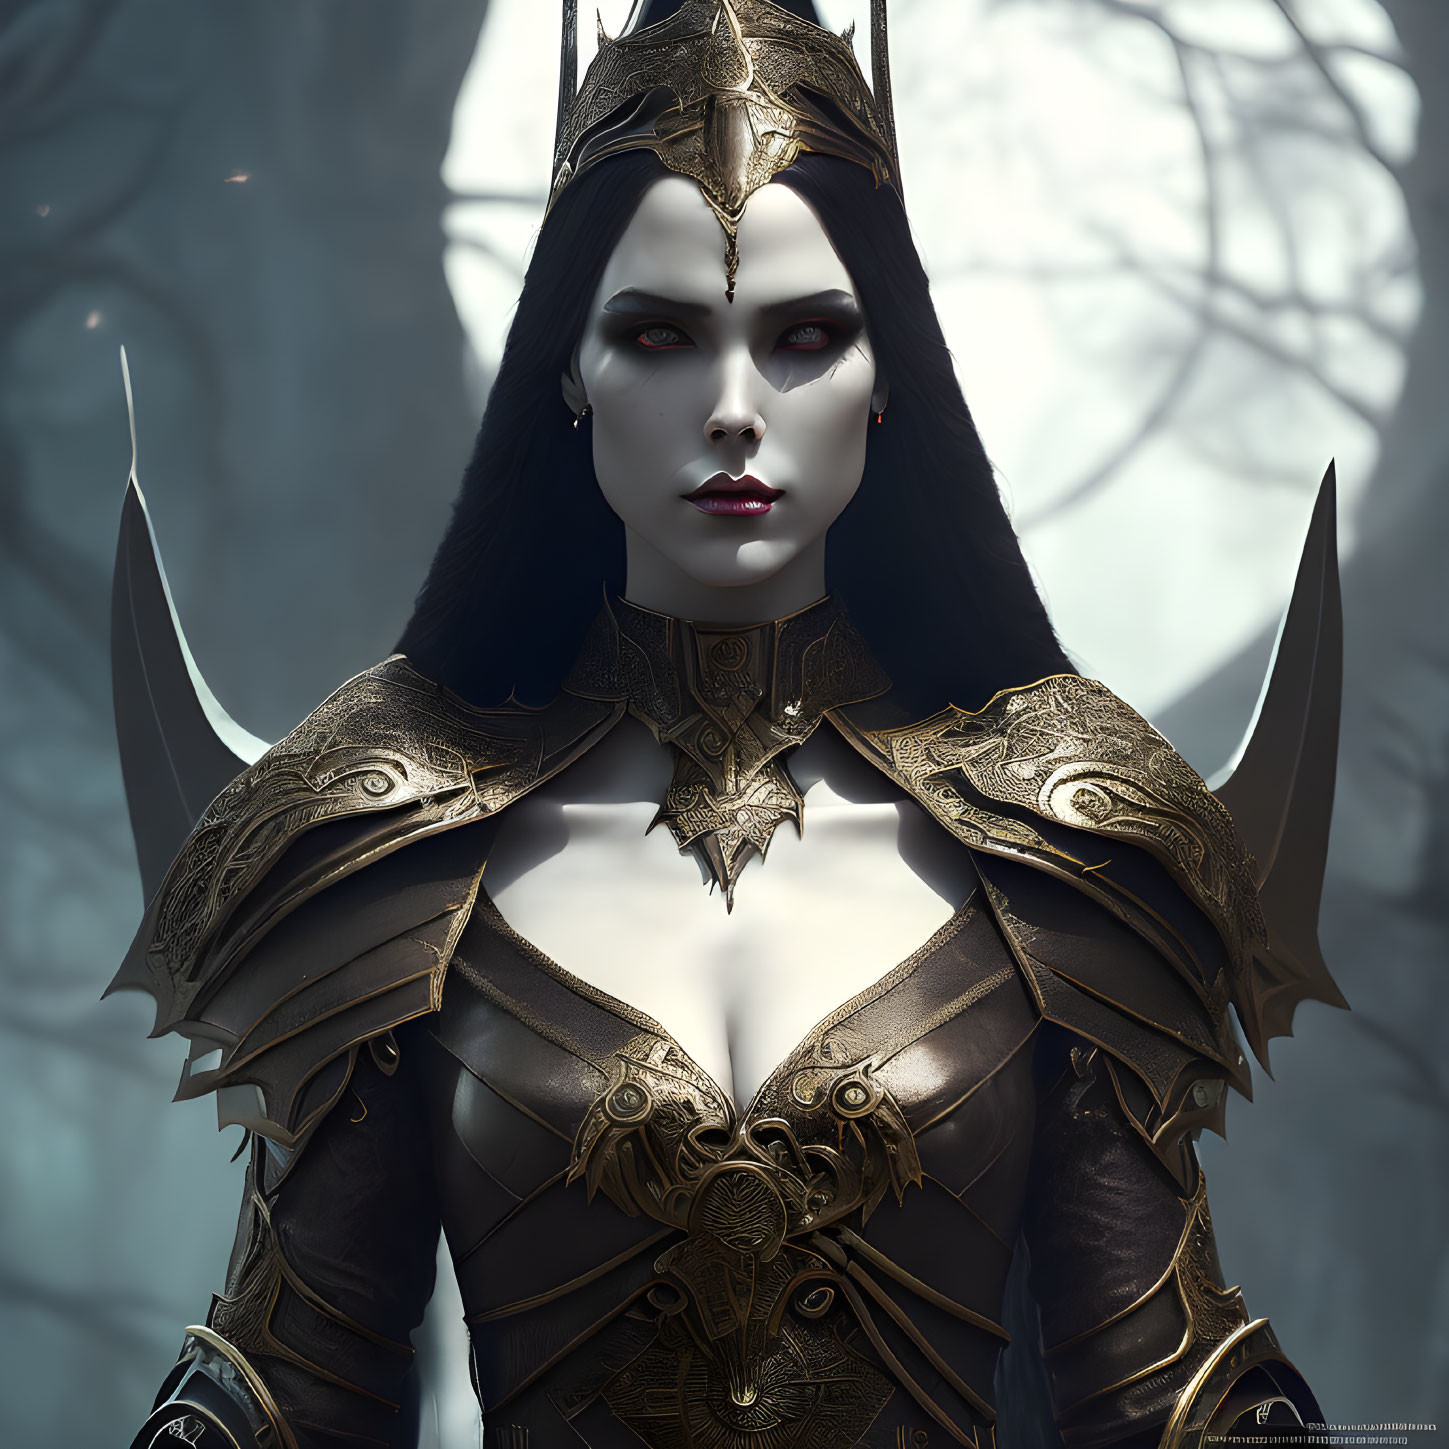 Regal female character in detailed dark armor against misty forest.